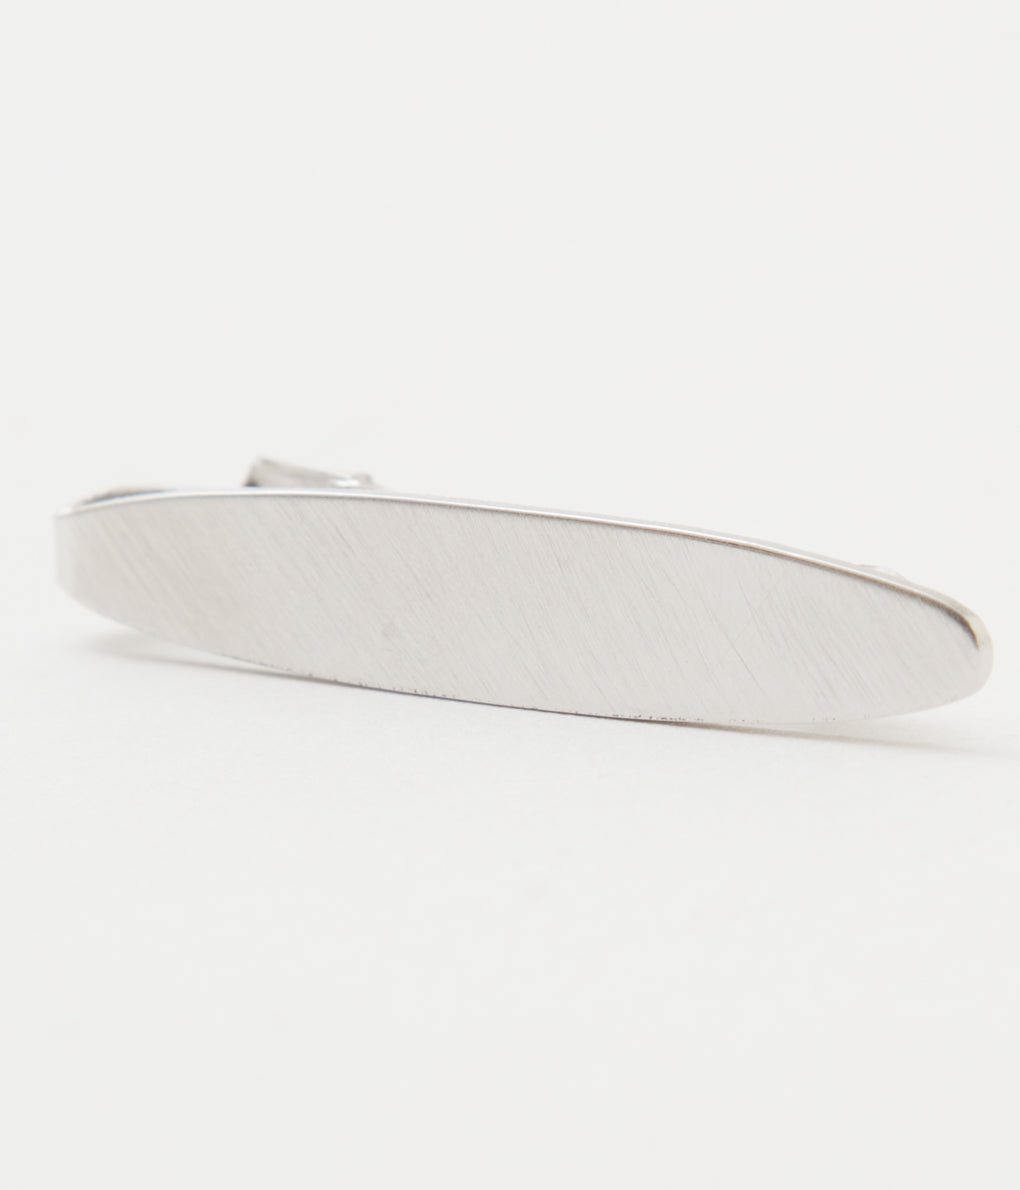 FINE AND DANDY "TIE BARS BRUSHED OVAL"(SILVER)